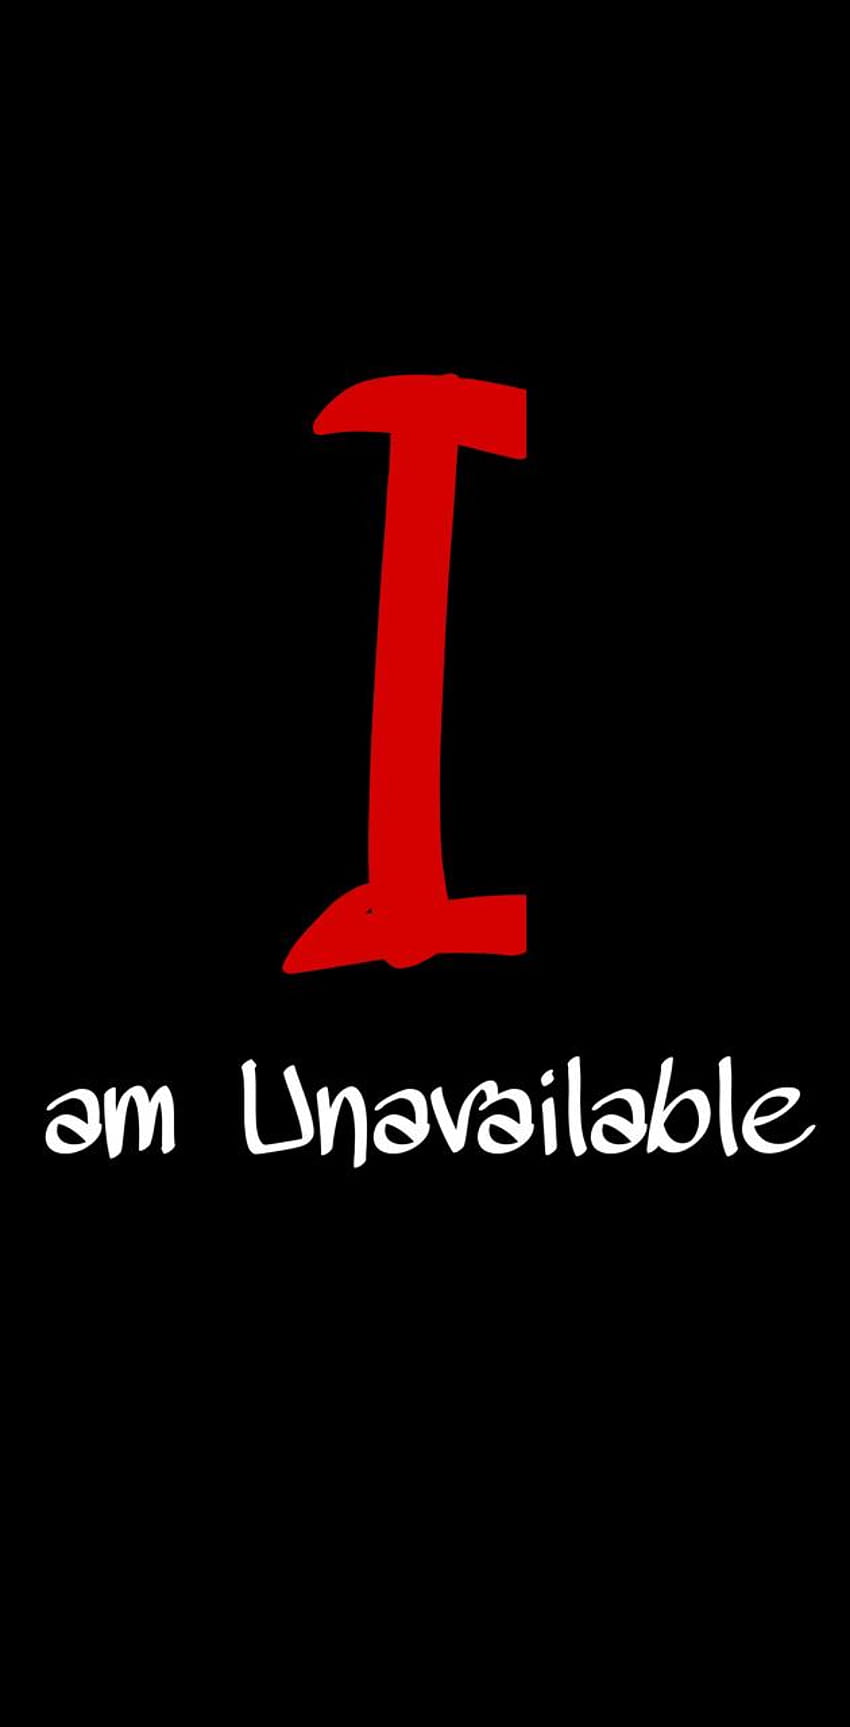 Unavailable Cut Out Stock Images & Pictures - Alamy